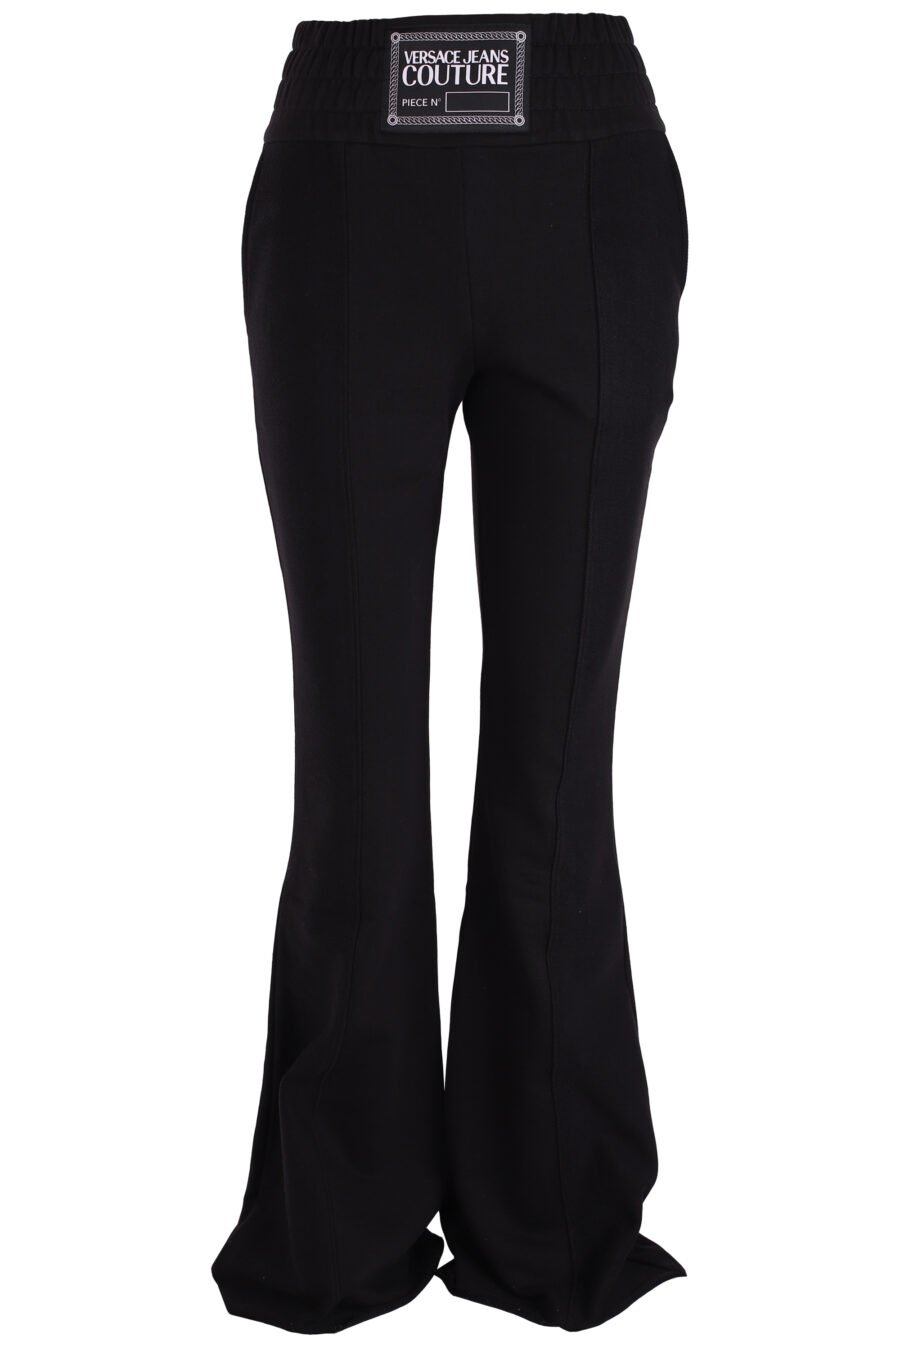 Flared black trousers with logo on waistband - IMG 3722